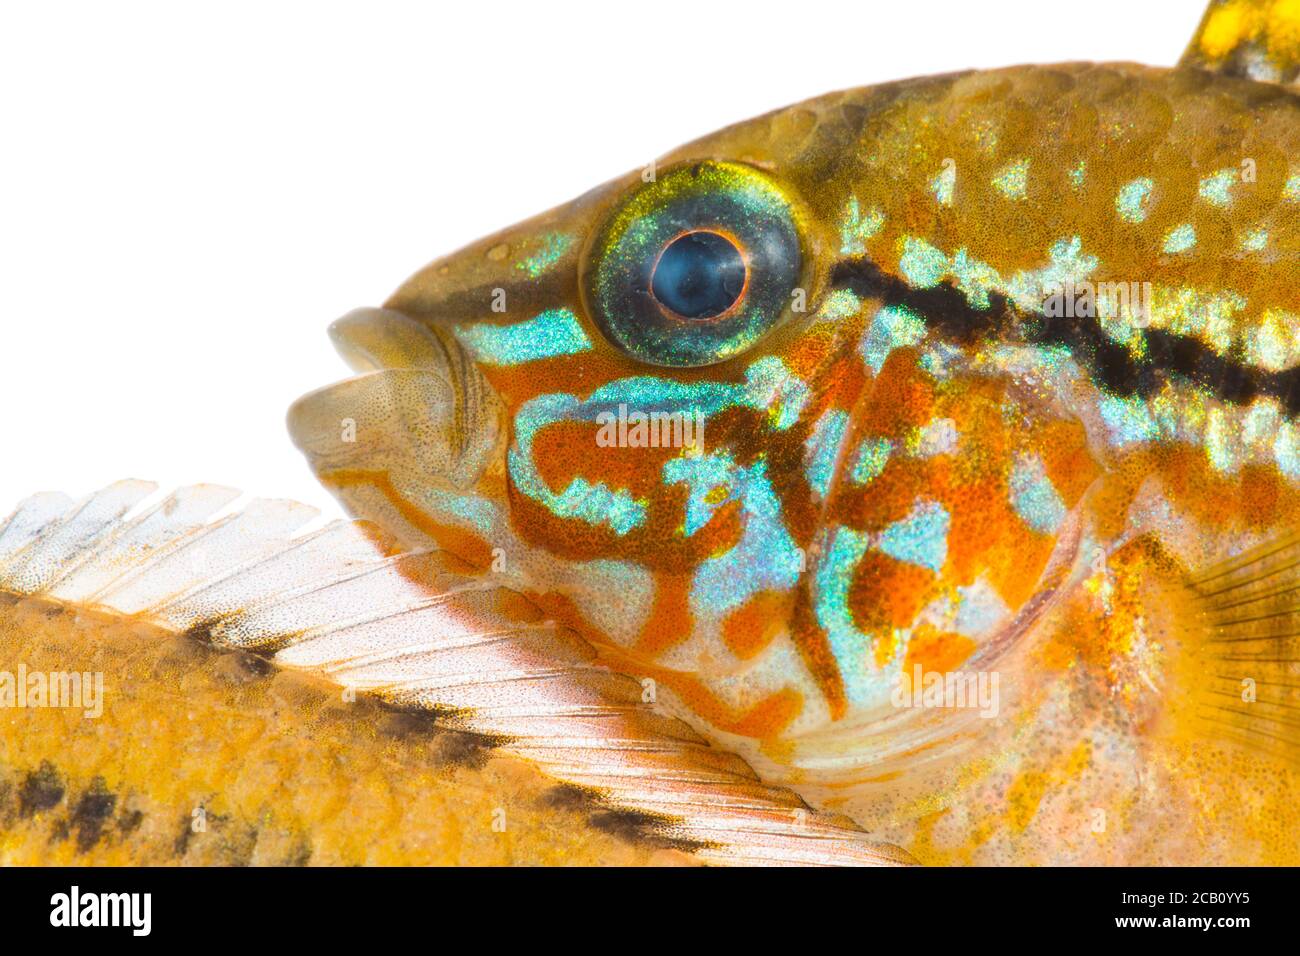 Apistogramma alacrina is a species of fish in the Cichlidae family of the order Perciformes. Stock Photo